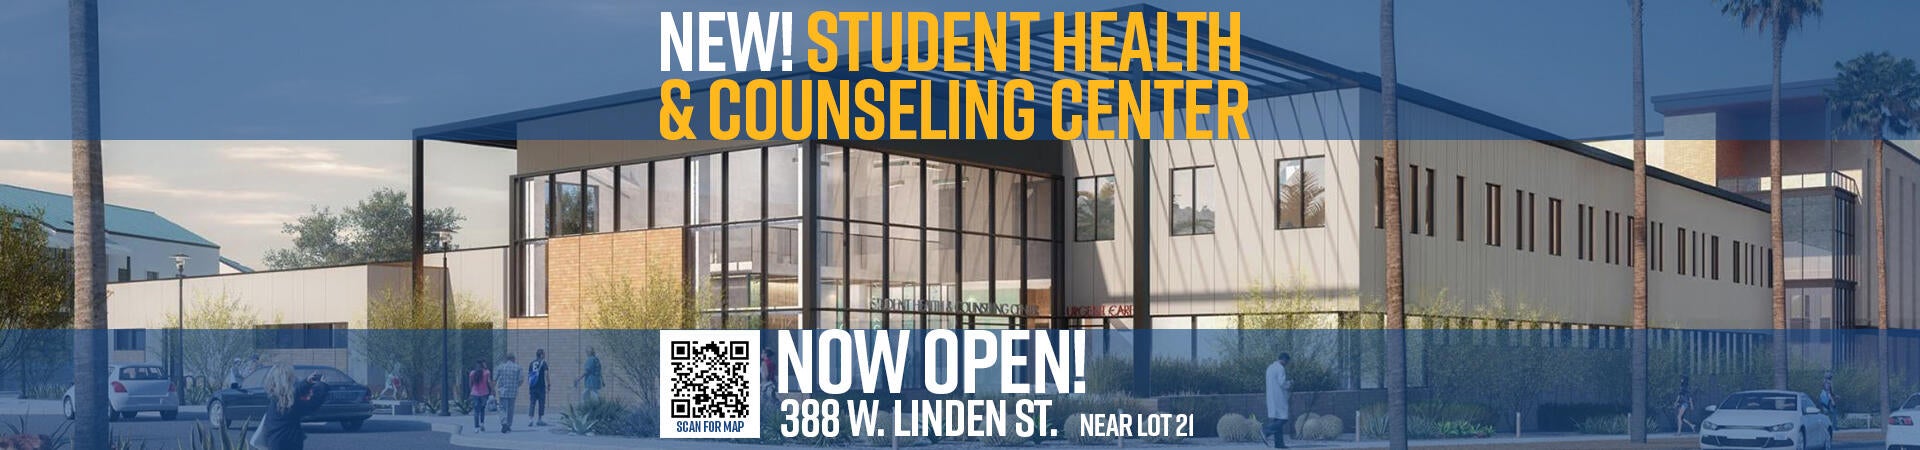 Student Health & Counseling Center 388 W. Linden St.